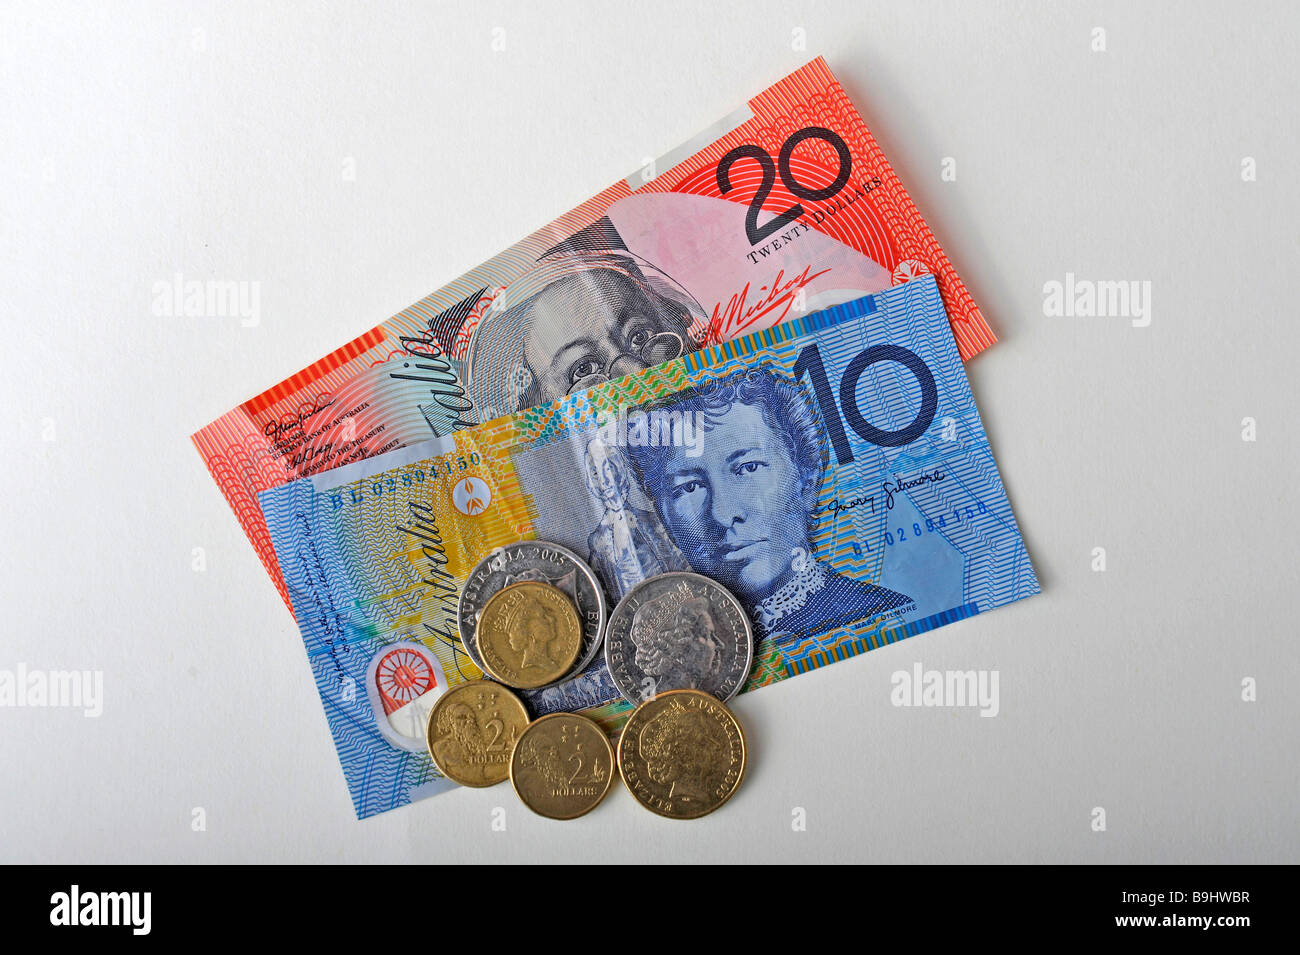 Australian coins and bank notes Stock Photo